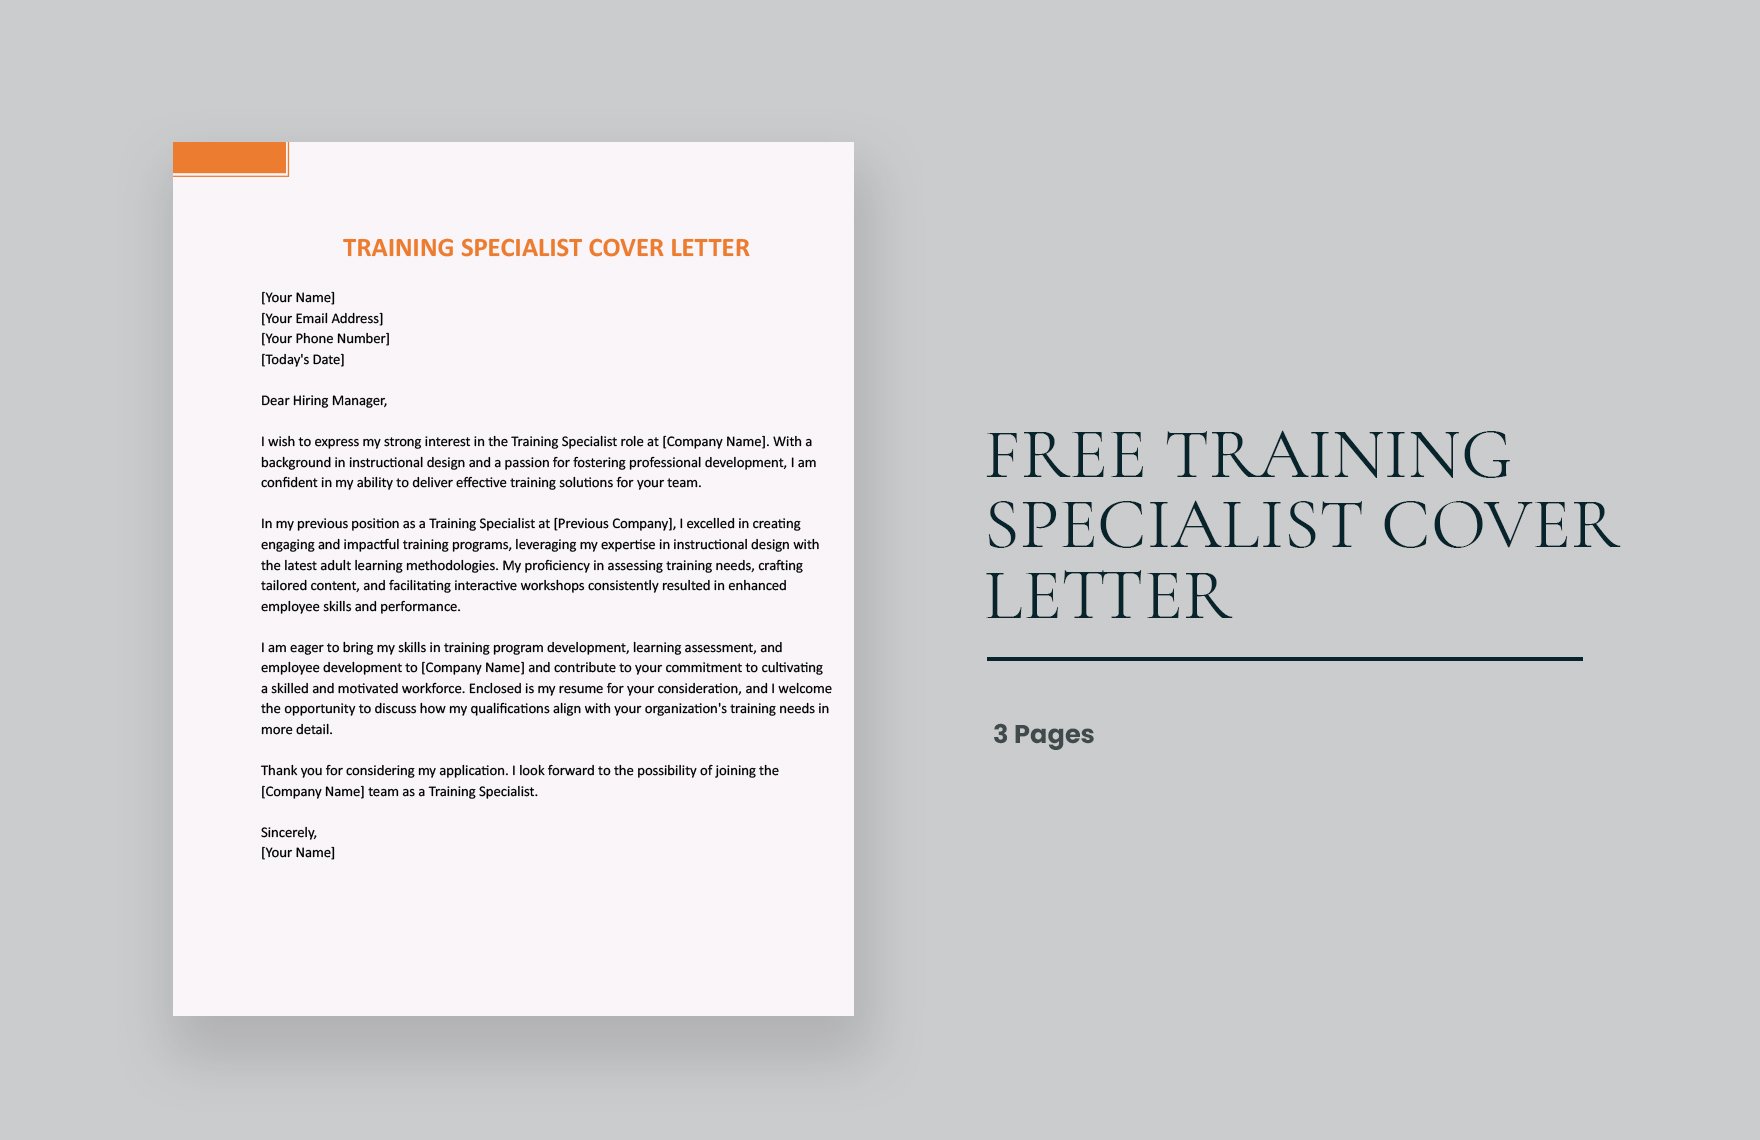 Training Specialist Cover Letter in Word, Google Docs